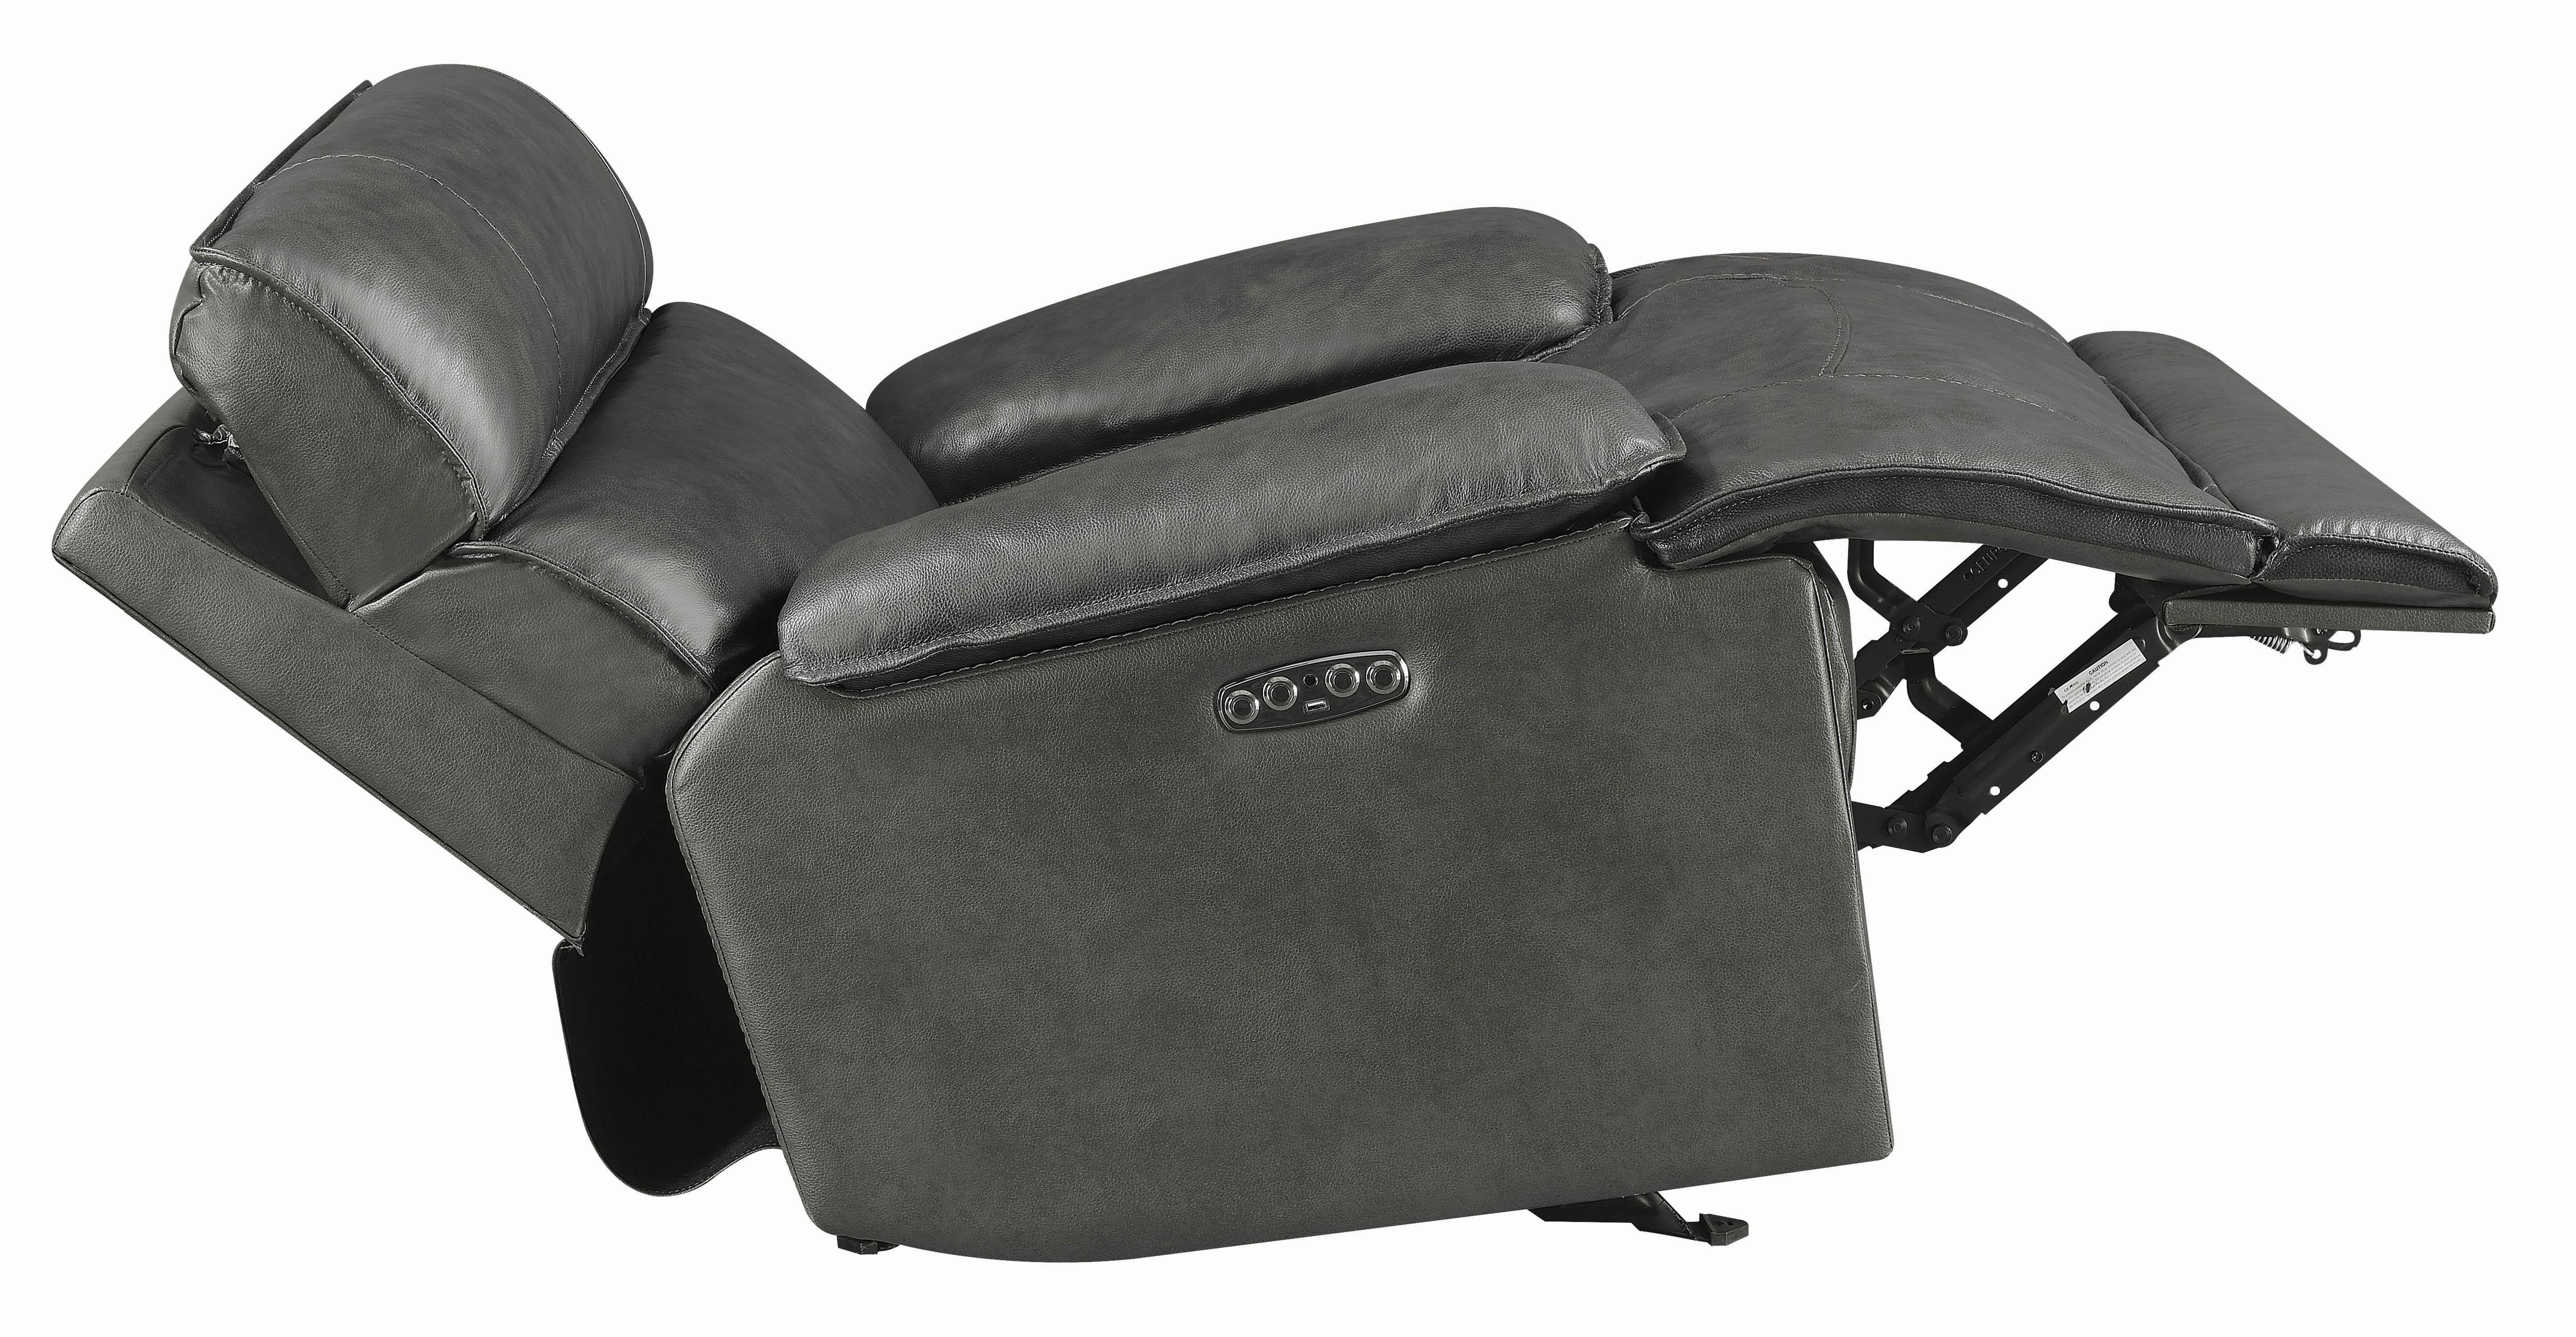 

    
650223PP Modern Gray Leather Upholstery Power2 glider recliner Stanford by Coaster
